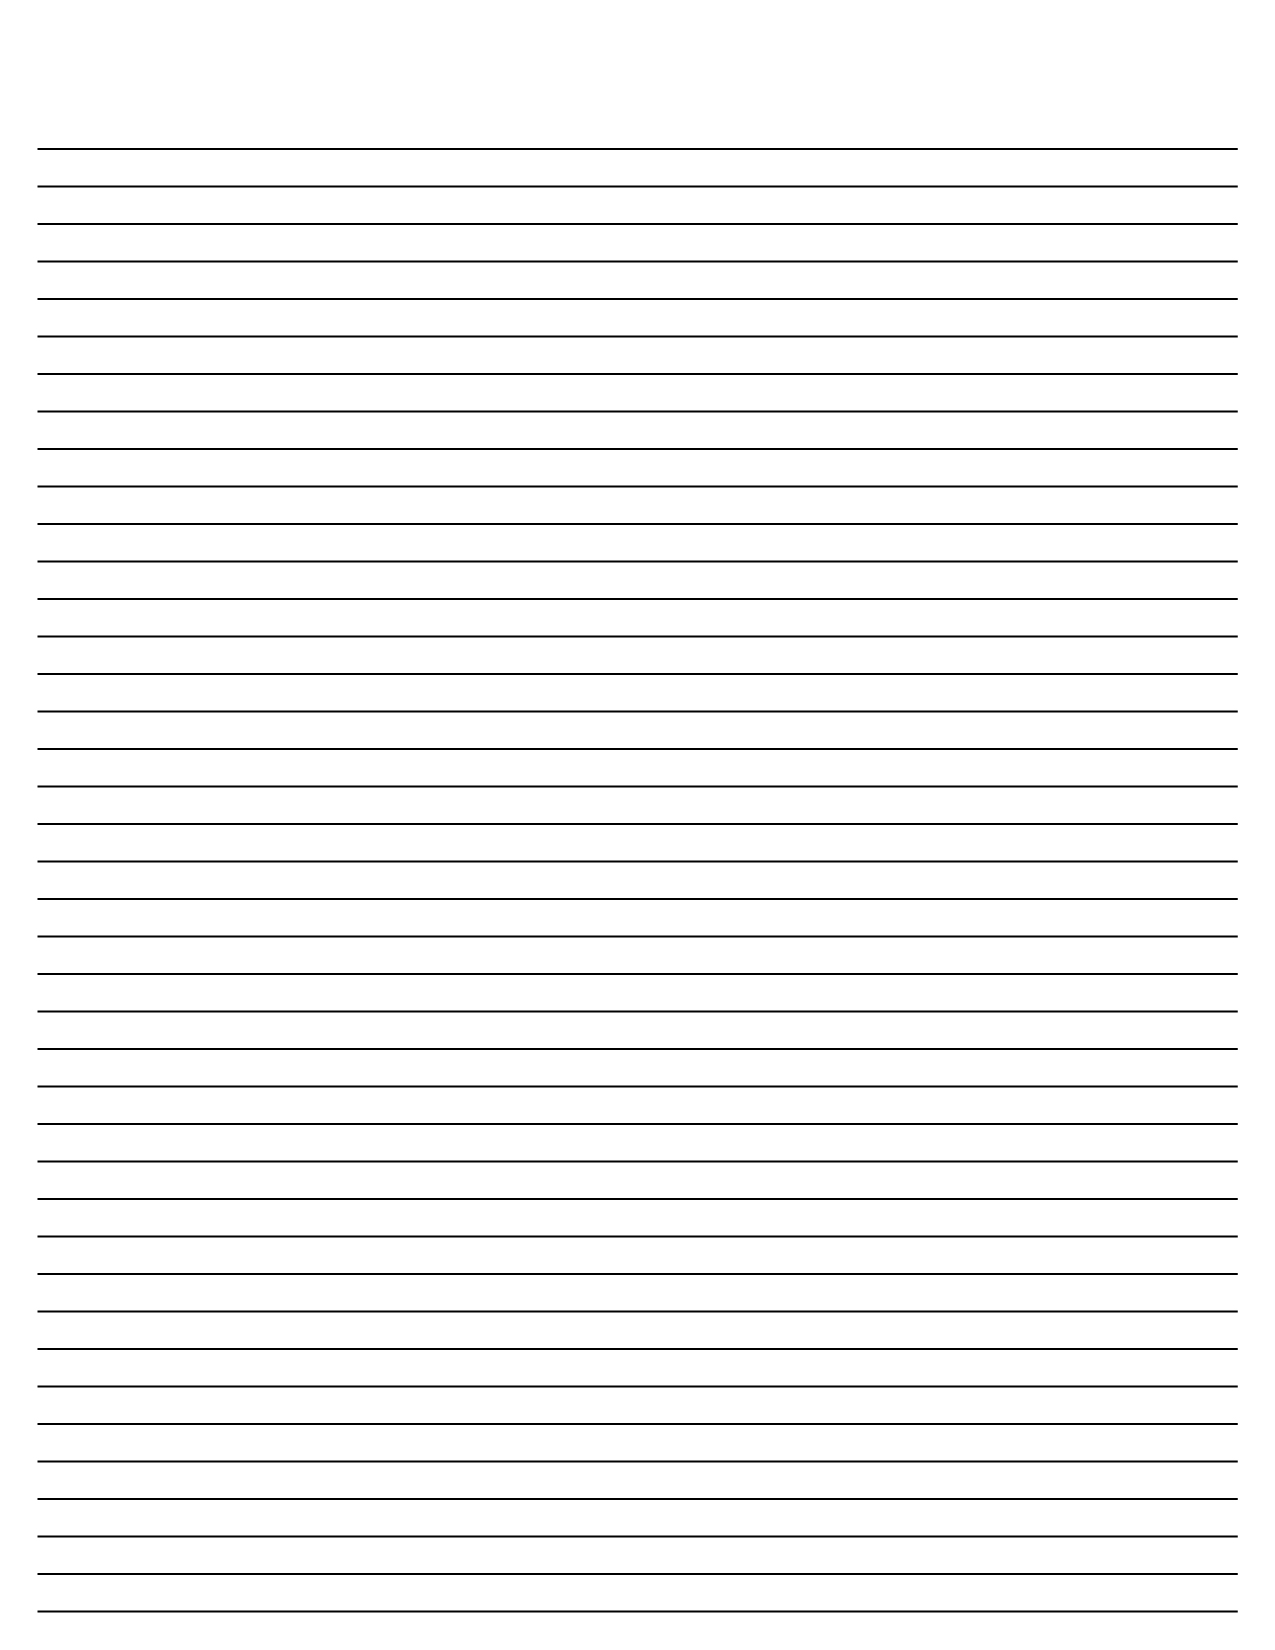 Blank Paper With Lines